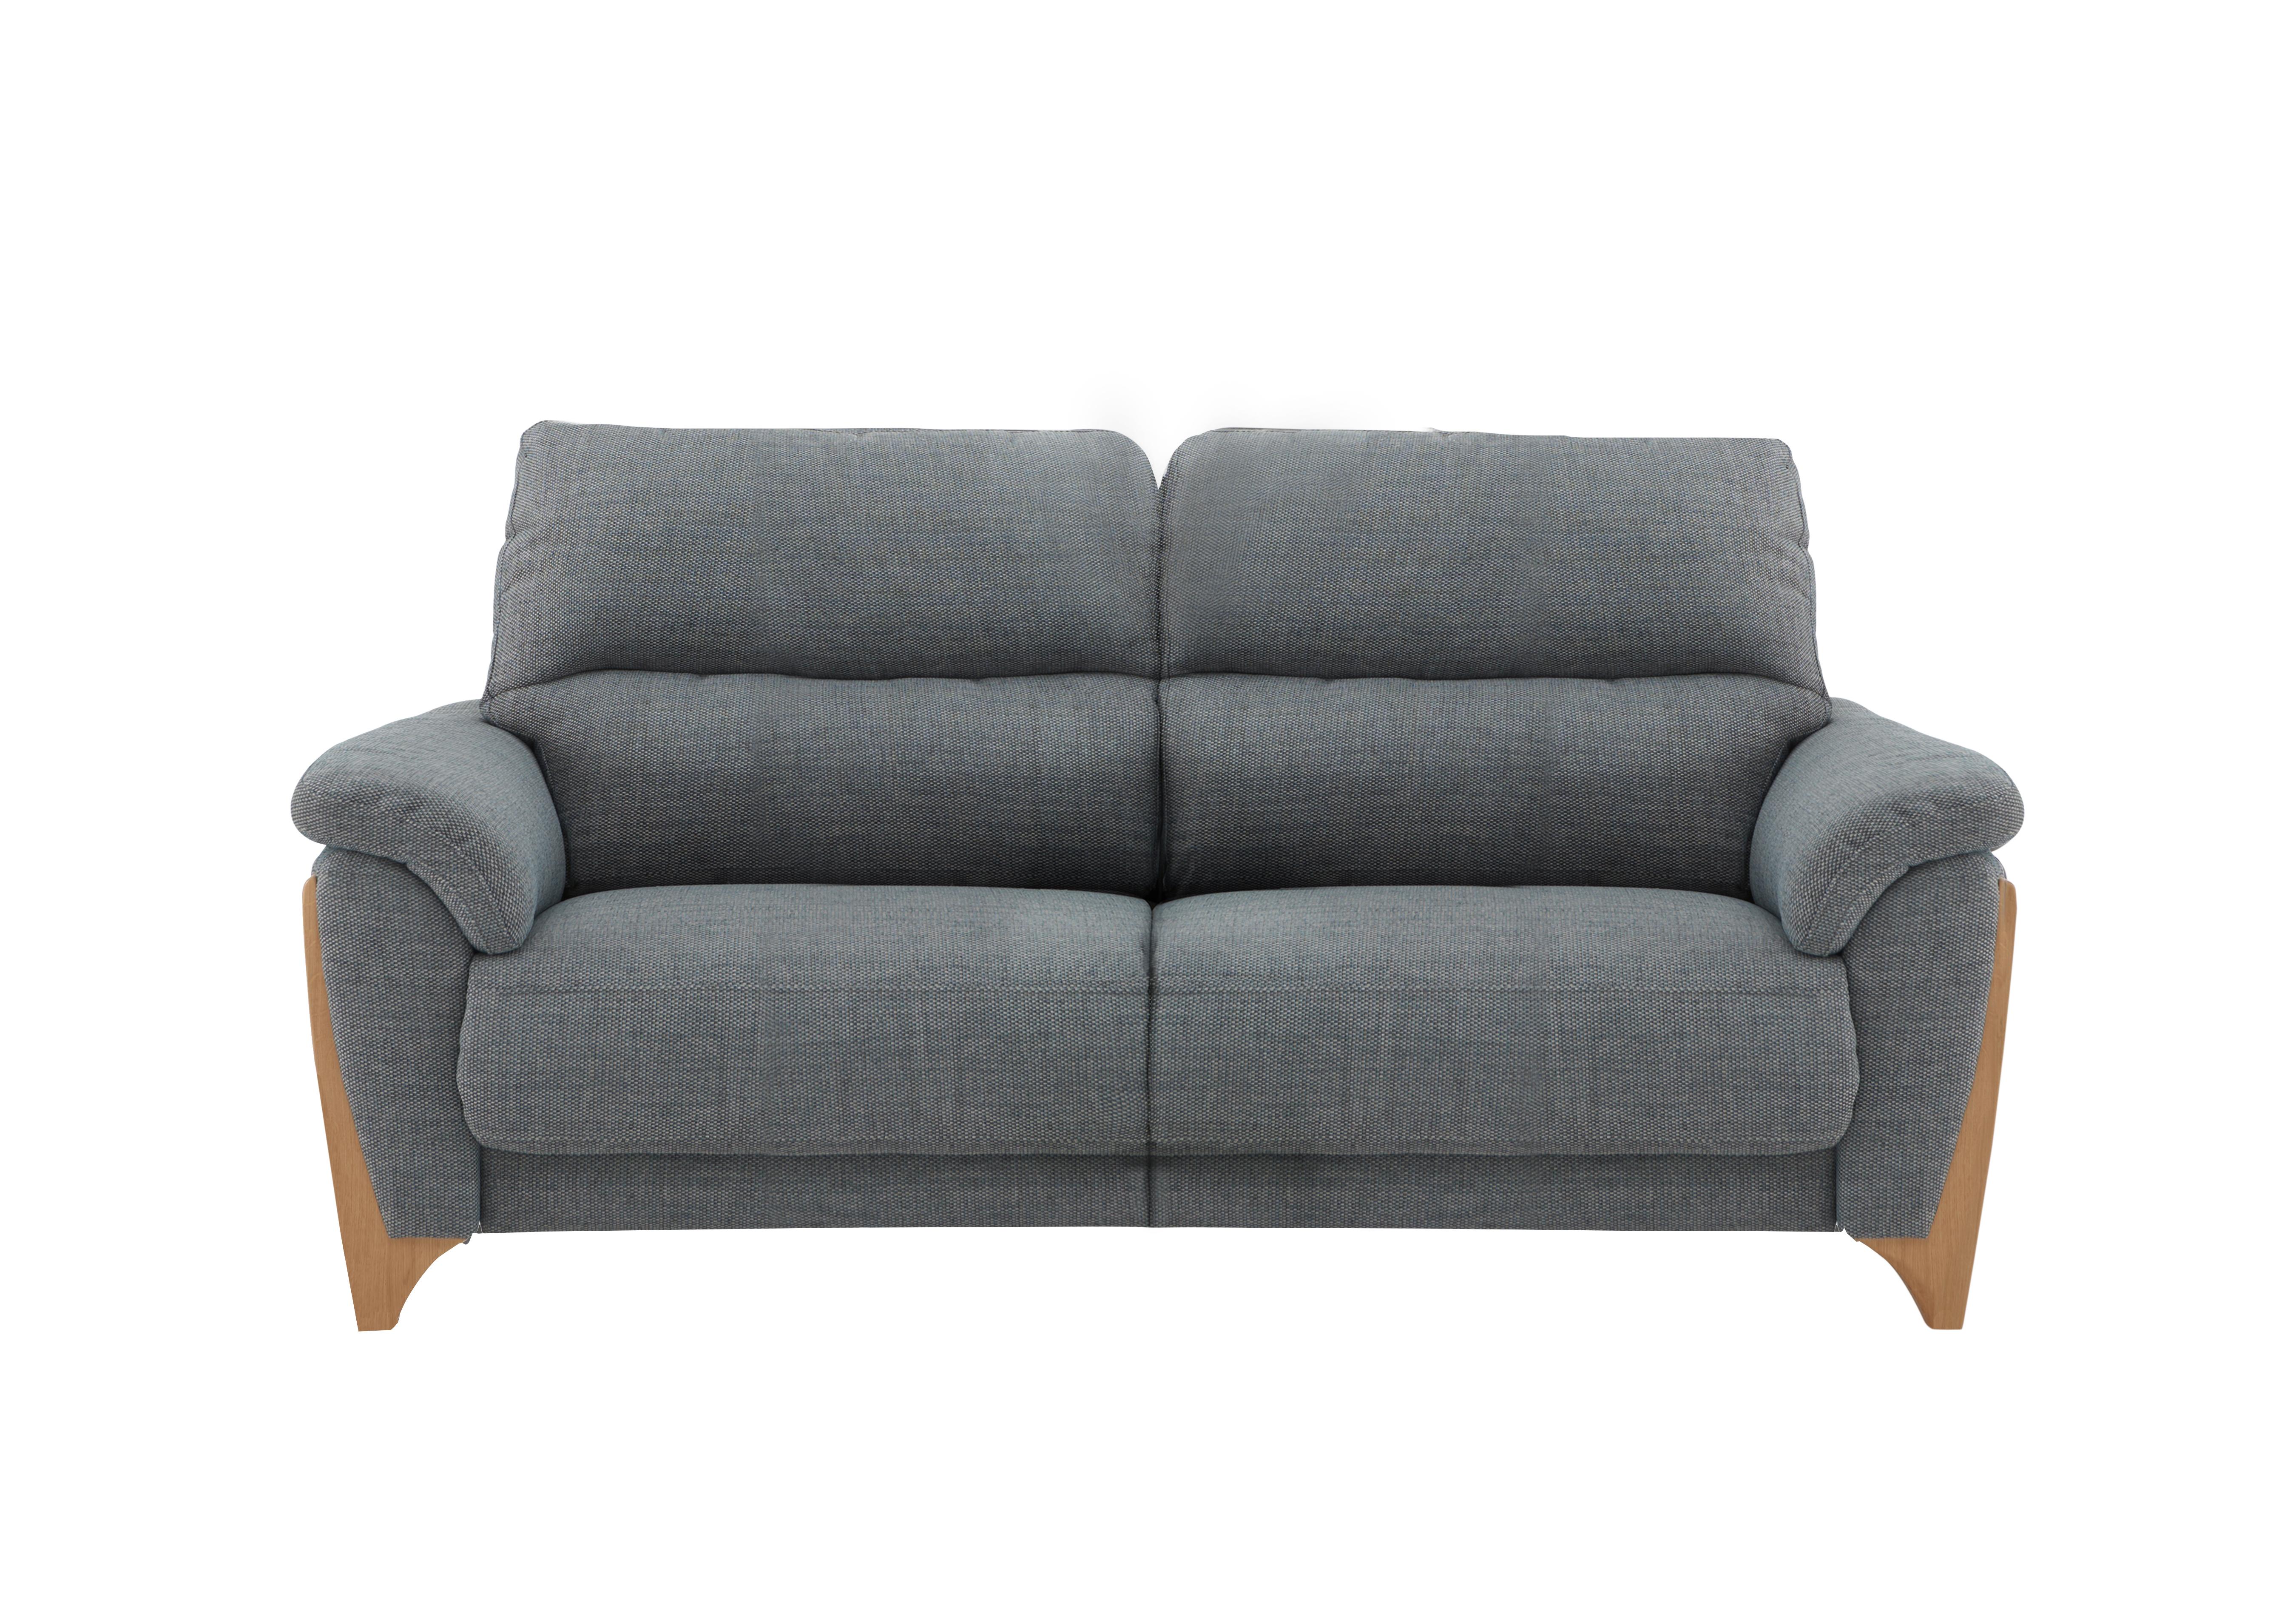 Enna Large Fabric Power Recliner Sofa in P222 on Furniture Village